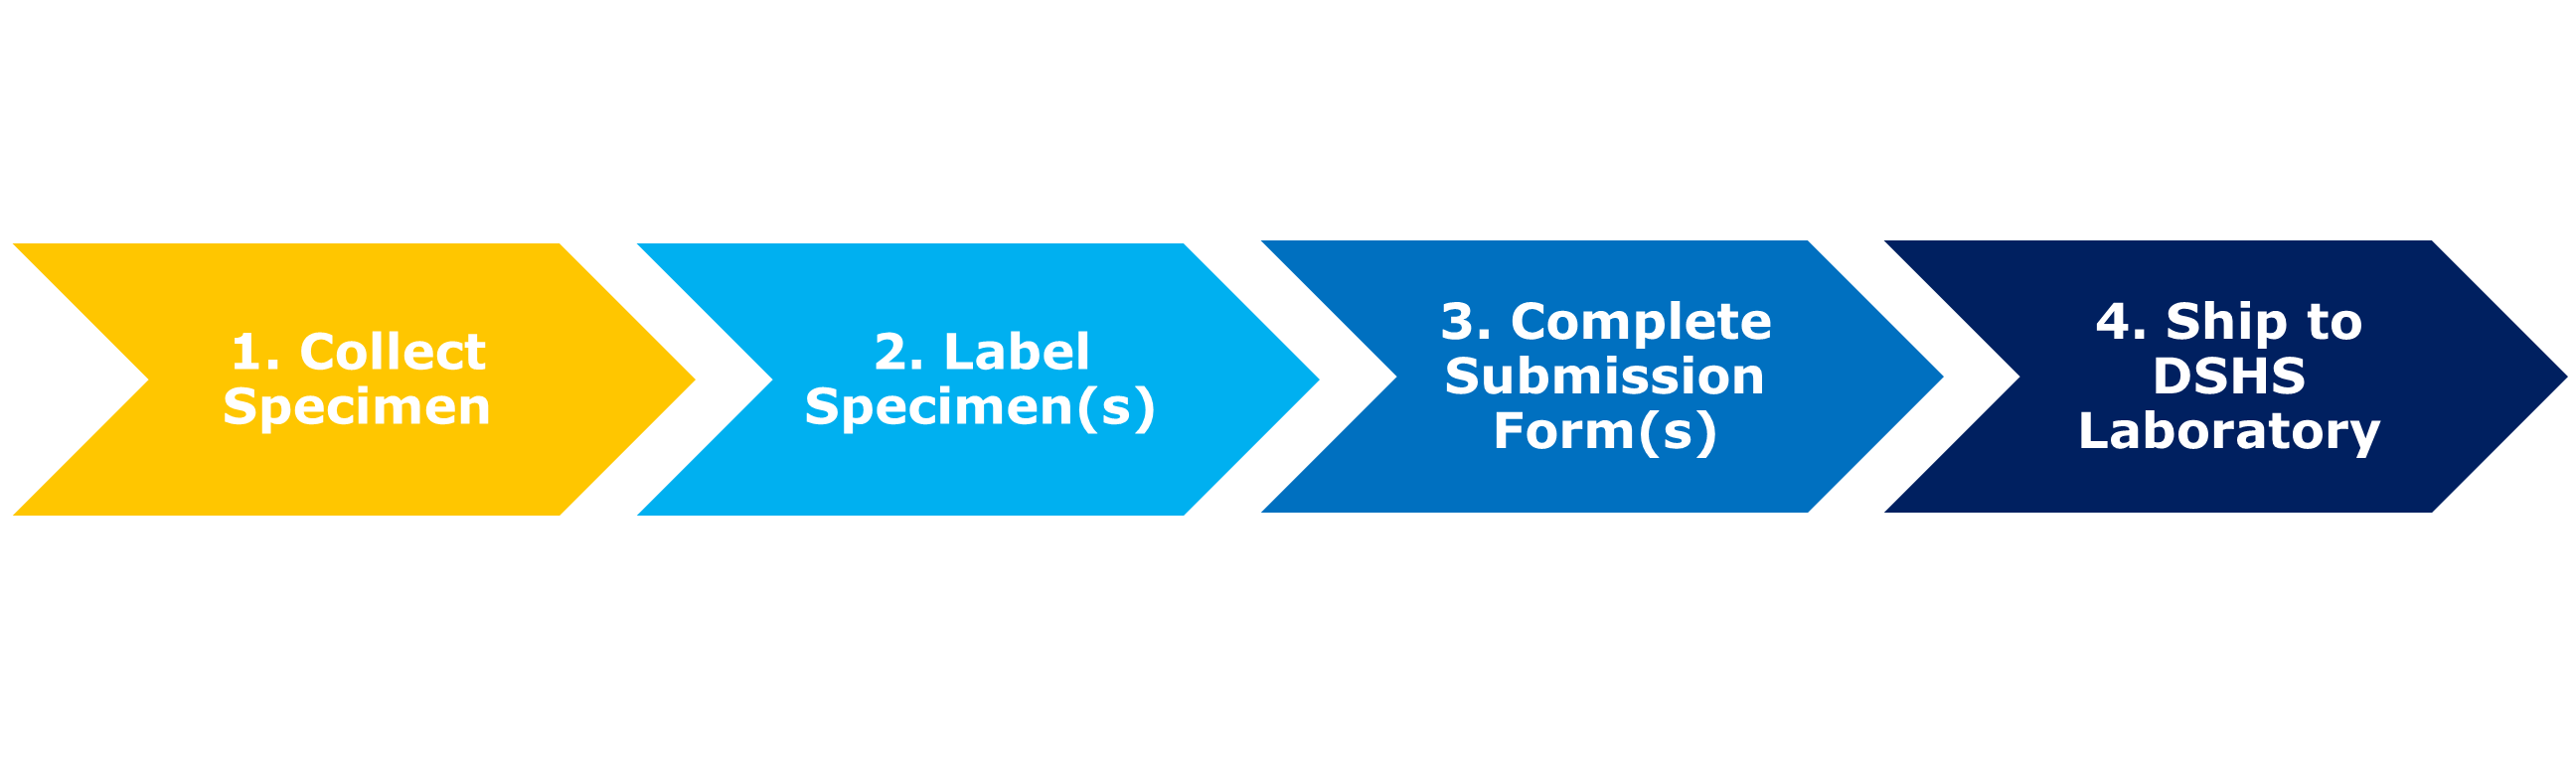 "Graphic of a four step process that lists Specimen Collection, Labeling of Specimen, Completing Submission Forms, and Shipping to Lab as the necessary steps to submitting specimens successfully to DSHS lab"